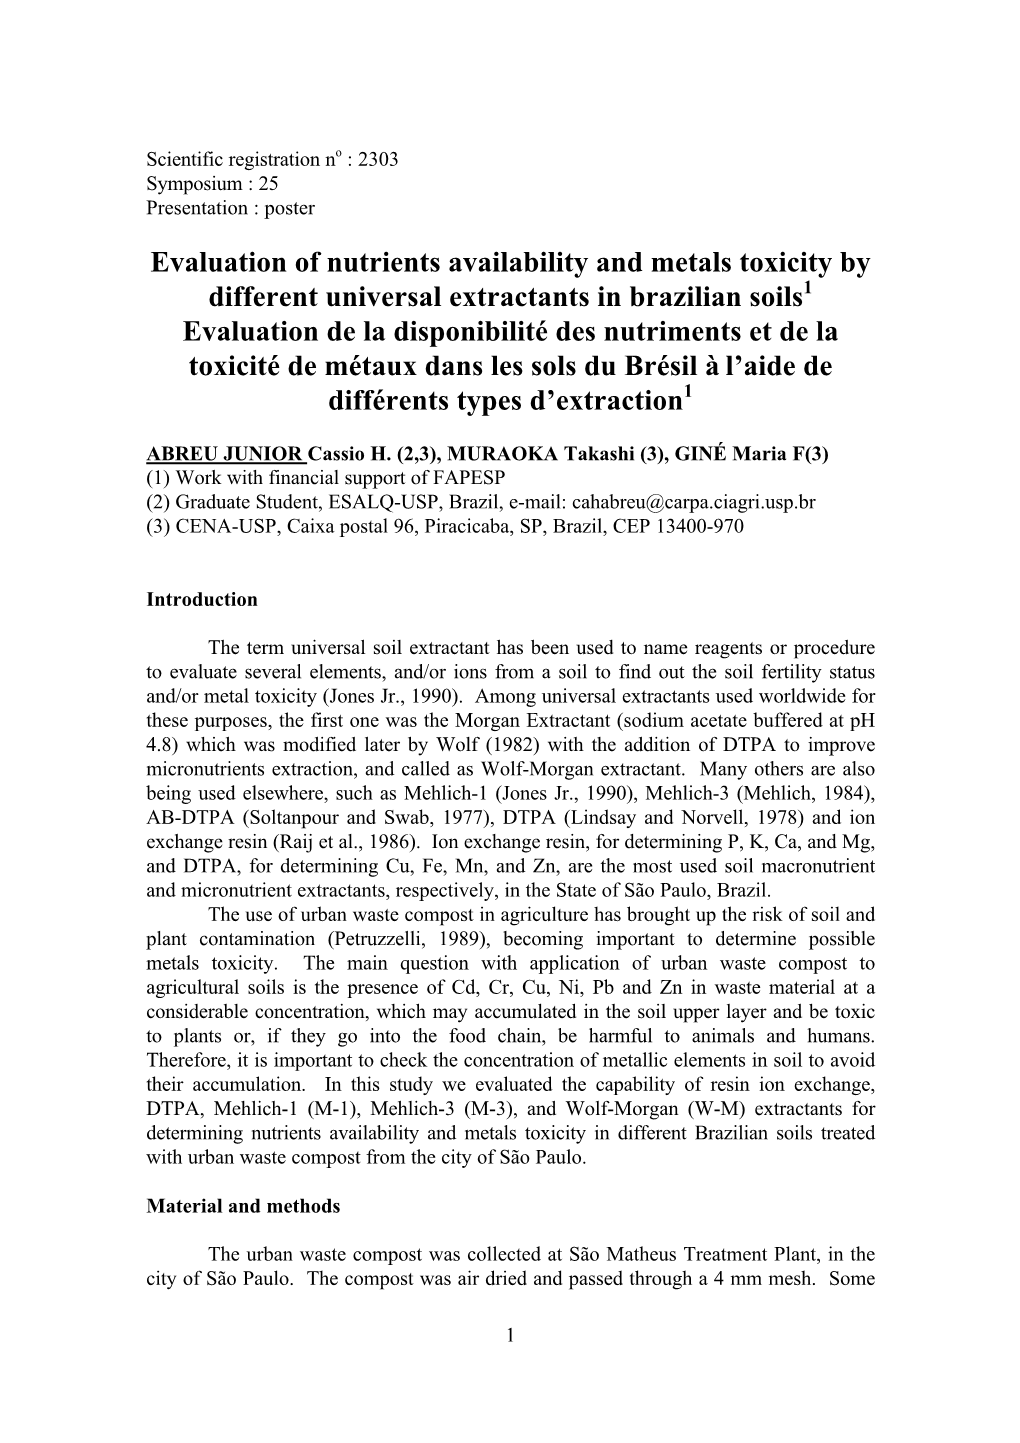 Evaluation of Nutrients Availability and Metals Toxicity by Different Universal